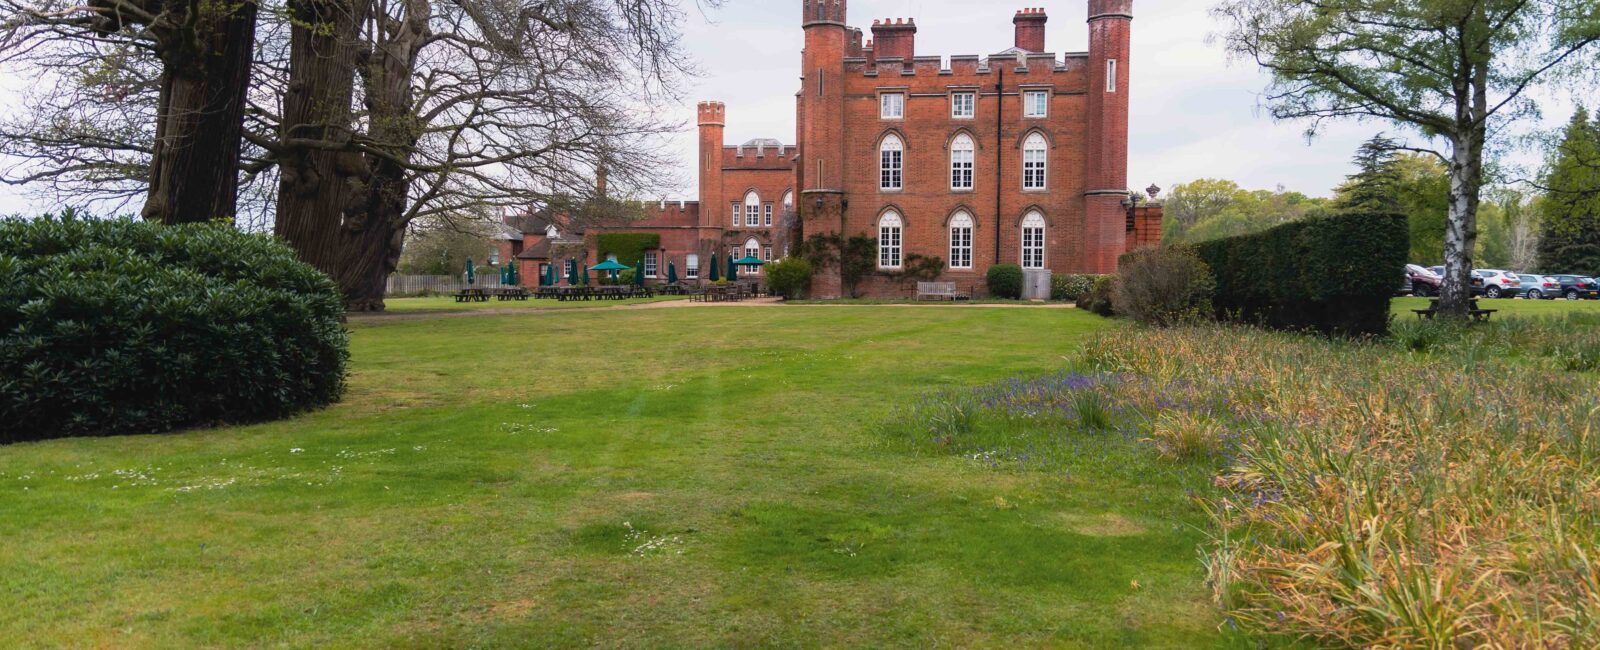 An area of lawn space at the side of the Cumberland Lodge building